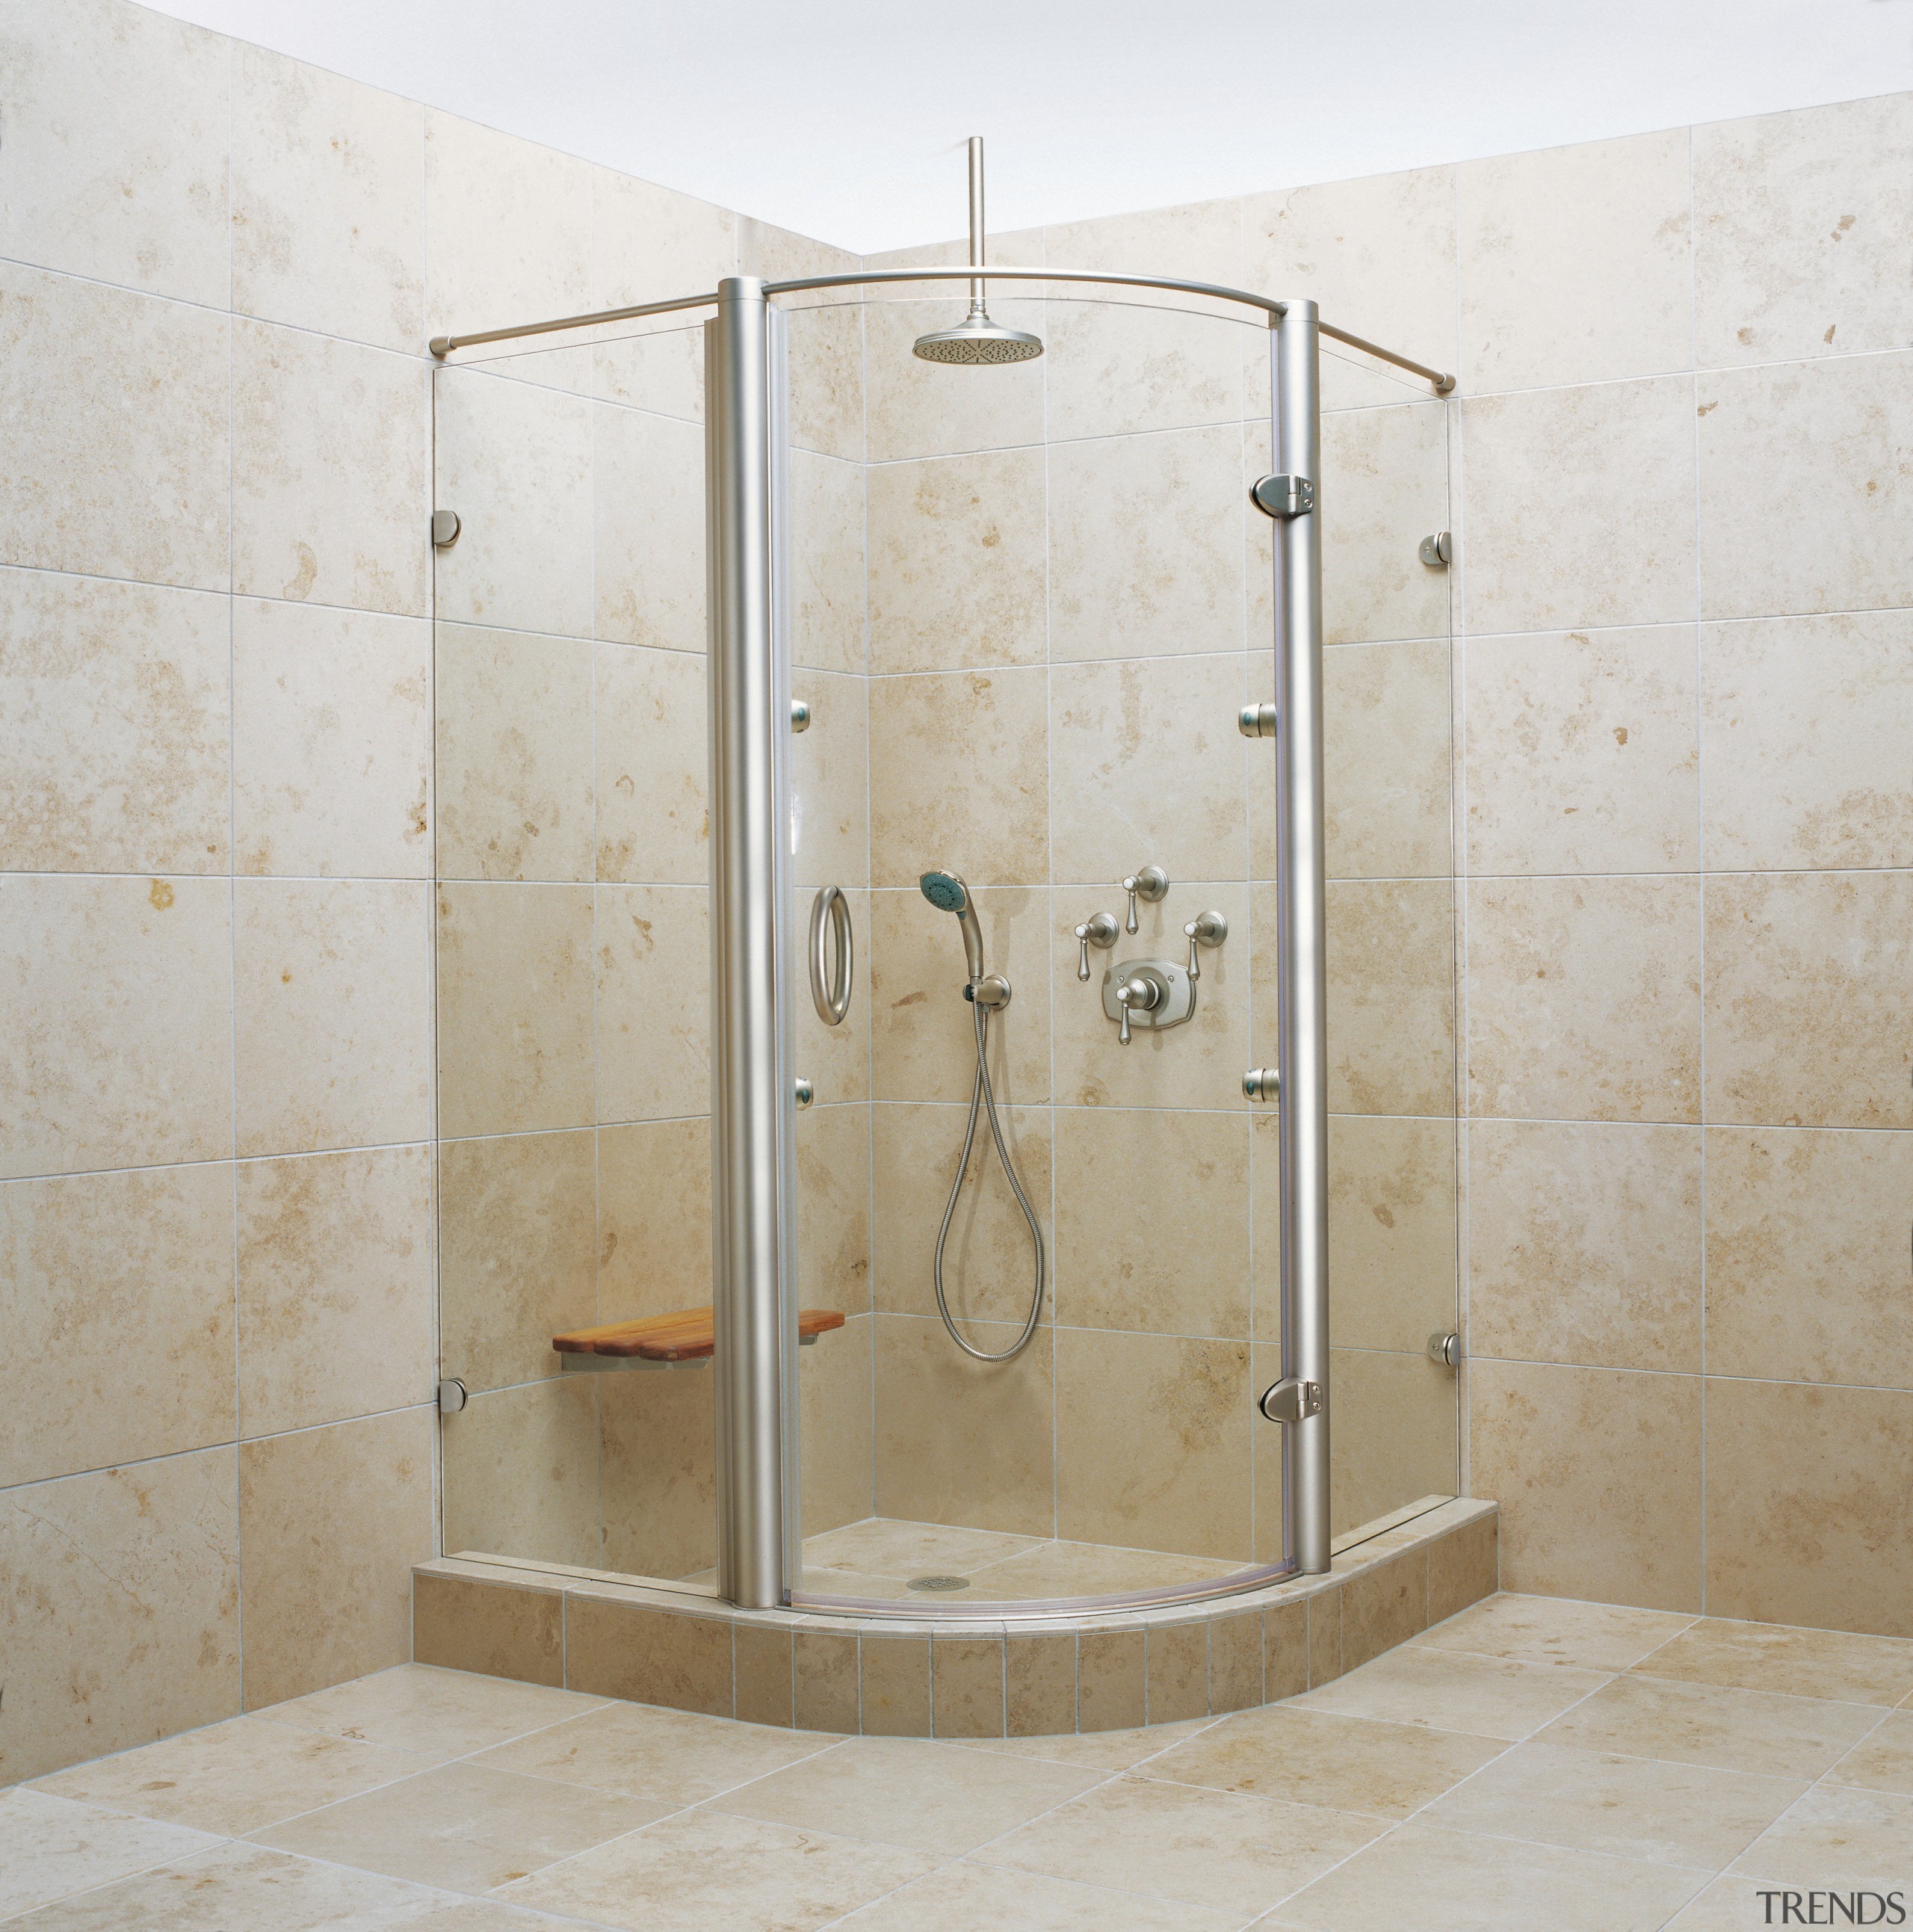 View of the shower - View of the plumbing fixture, shower, gray